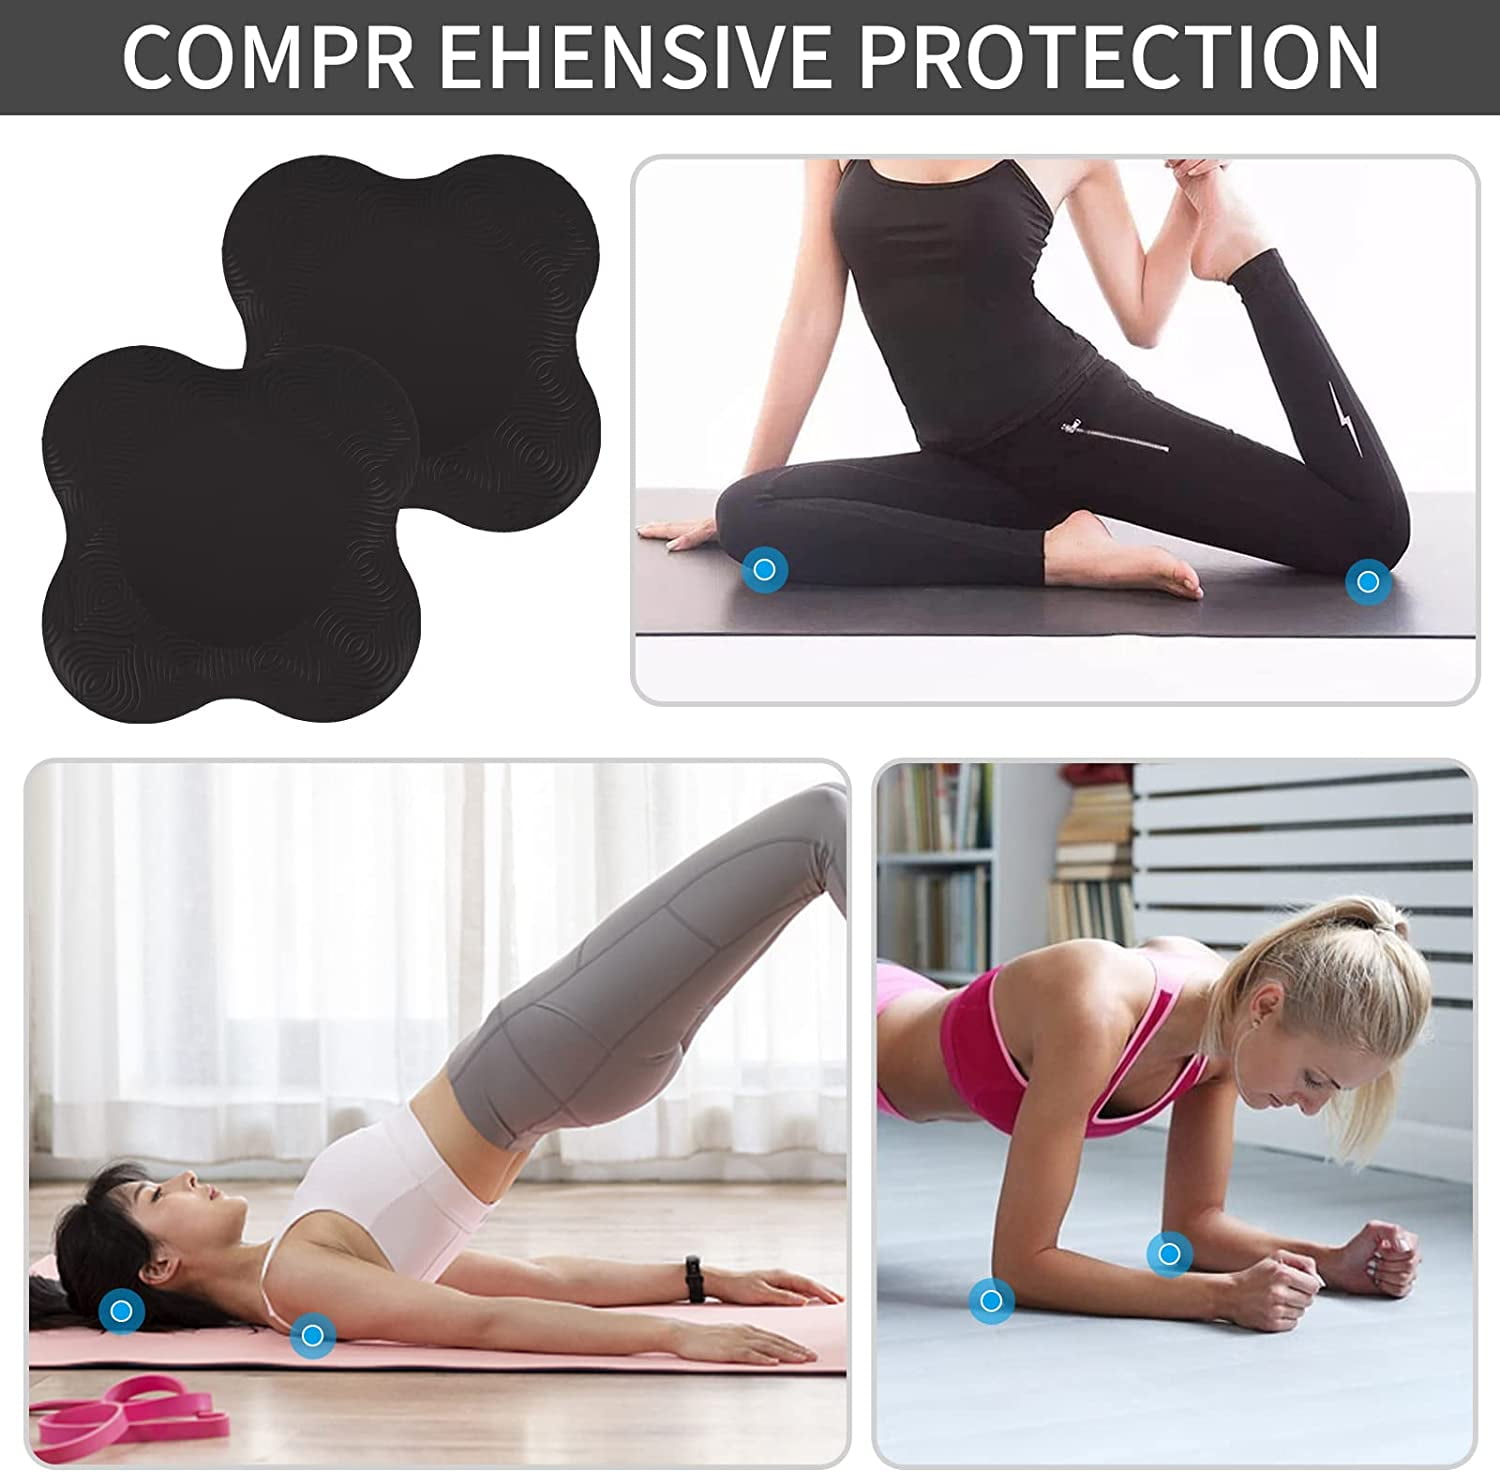 Yoga Knee Pads, 2 Pack Non-slip Yoga Knee Pads Mat Yoga Knee Pad Yoga  Support Pads For Protection Knees, Hands, Wrists And Elbows, 25x25cm